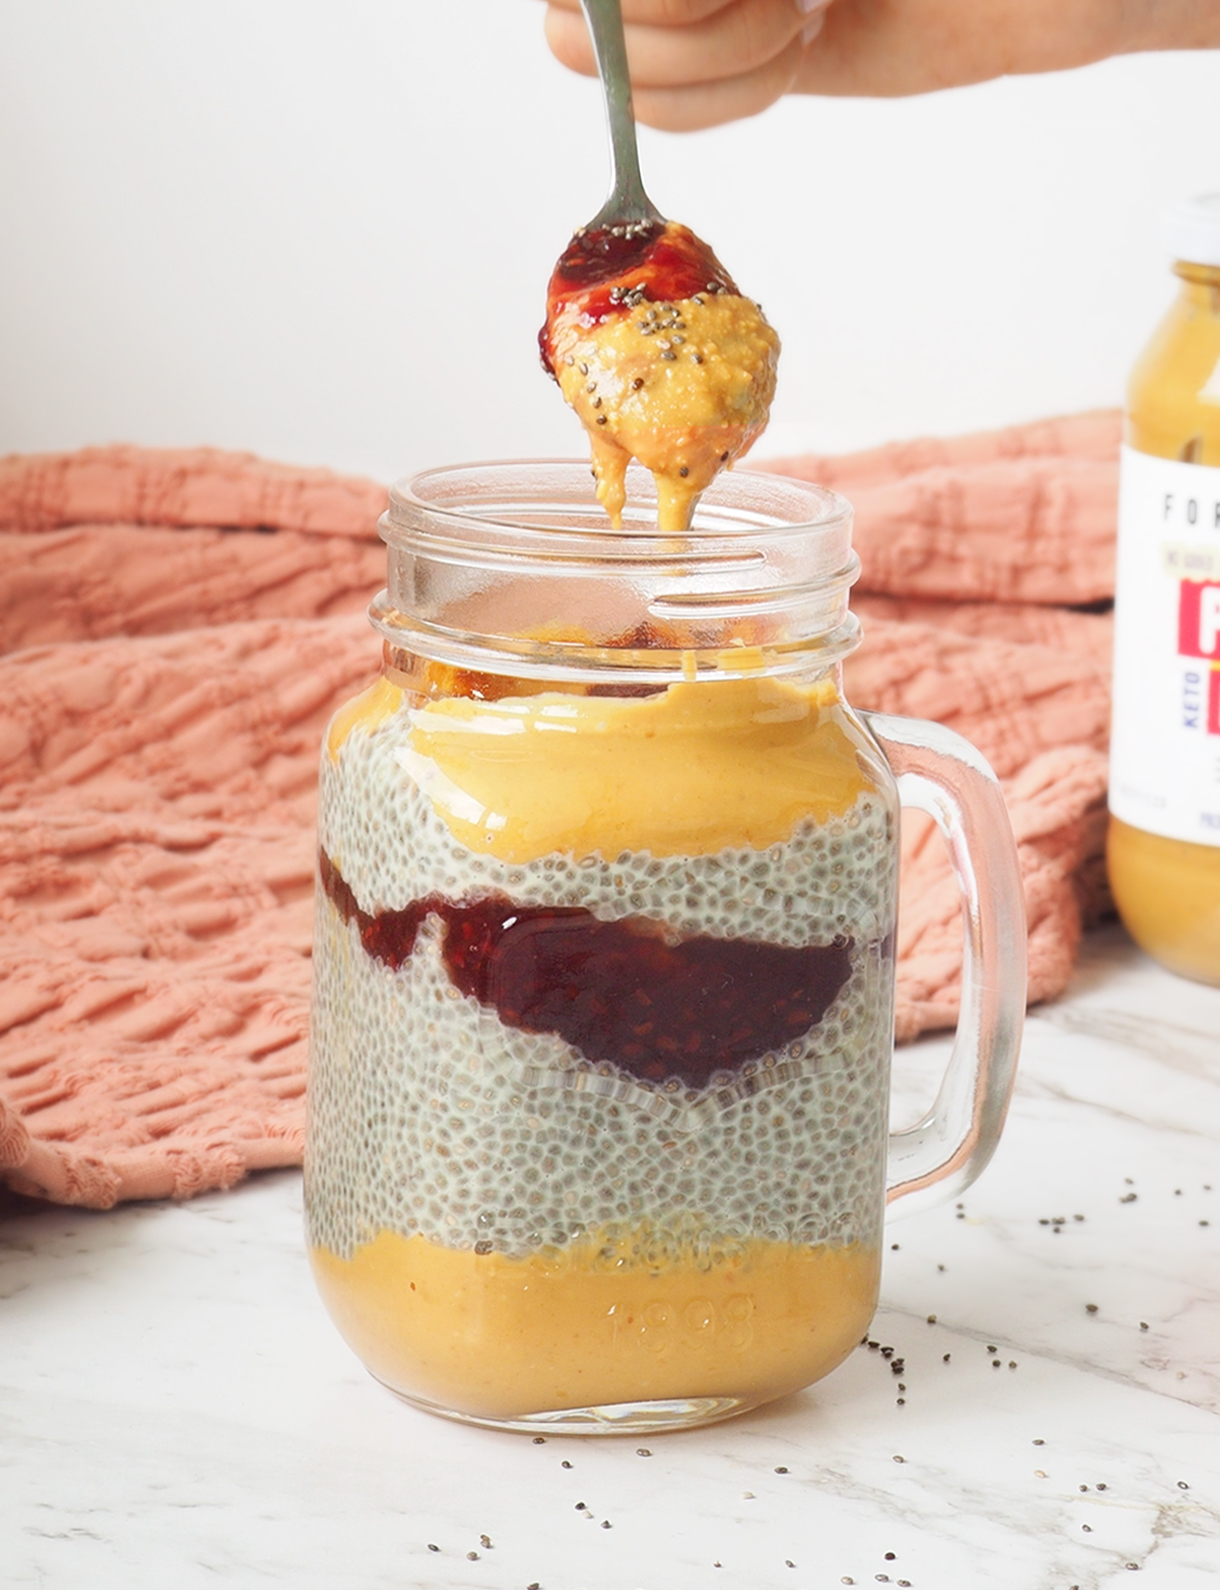 https://www.fortythieves.co.nz/wp-content/uploads/FT_Chia_Pudding_4.jpg